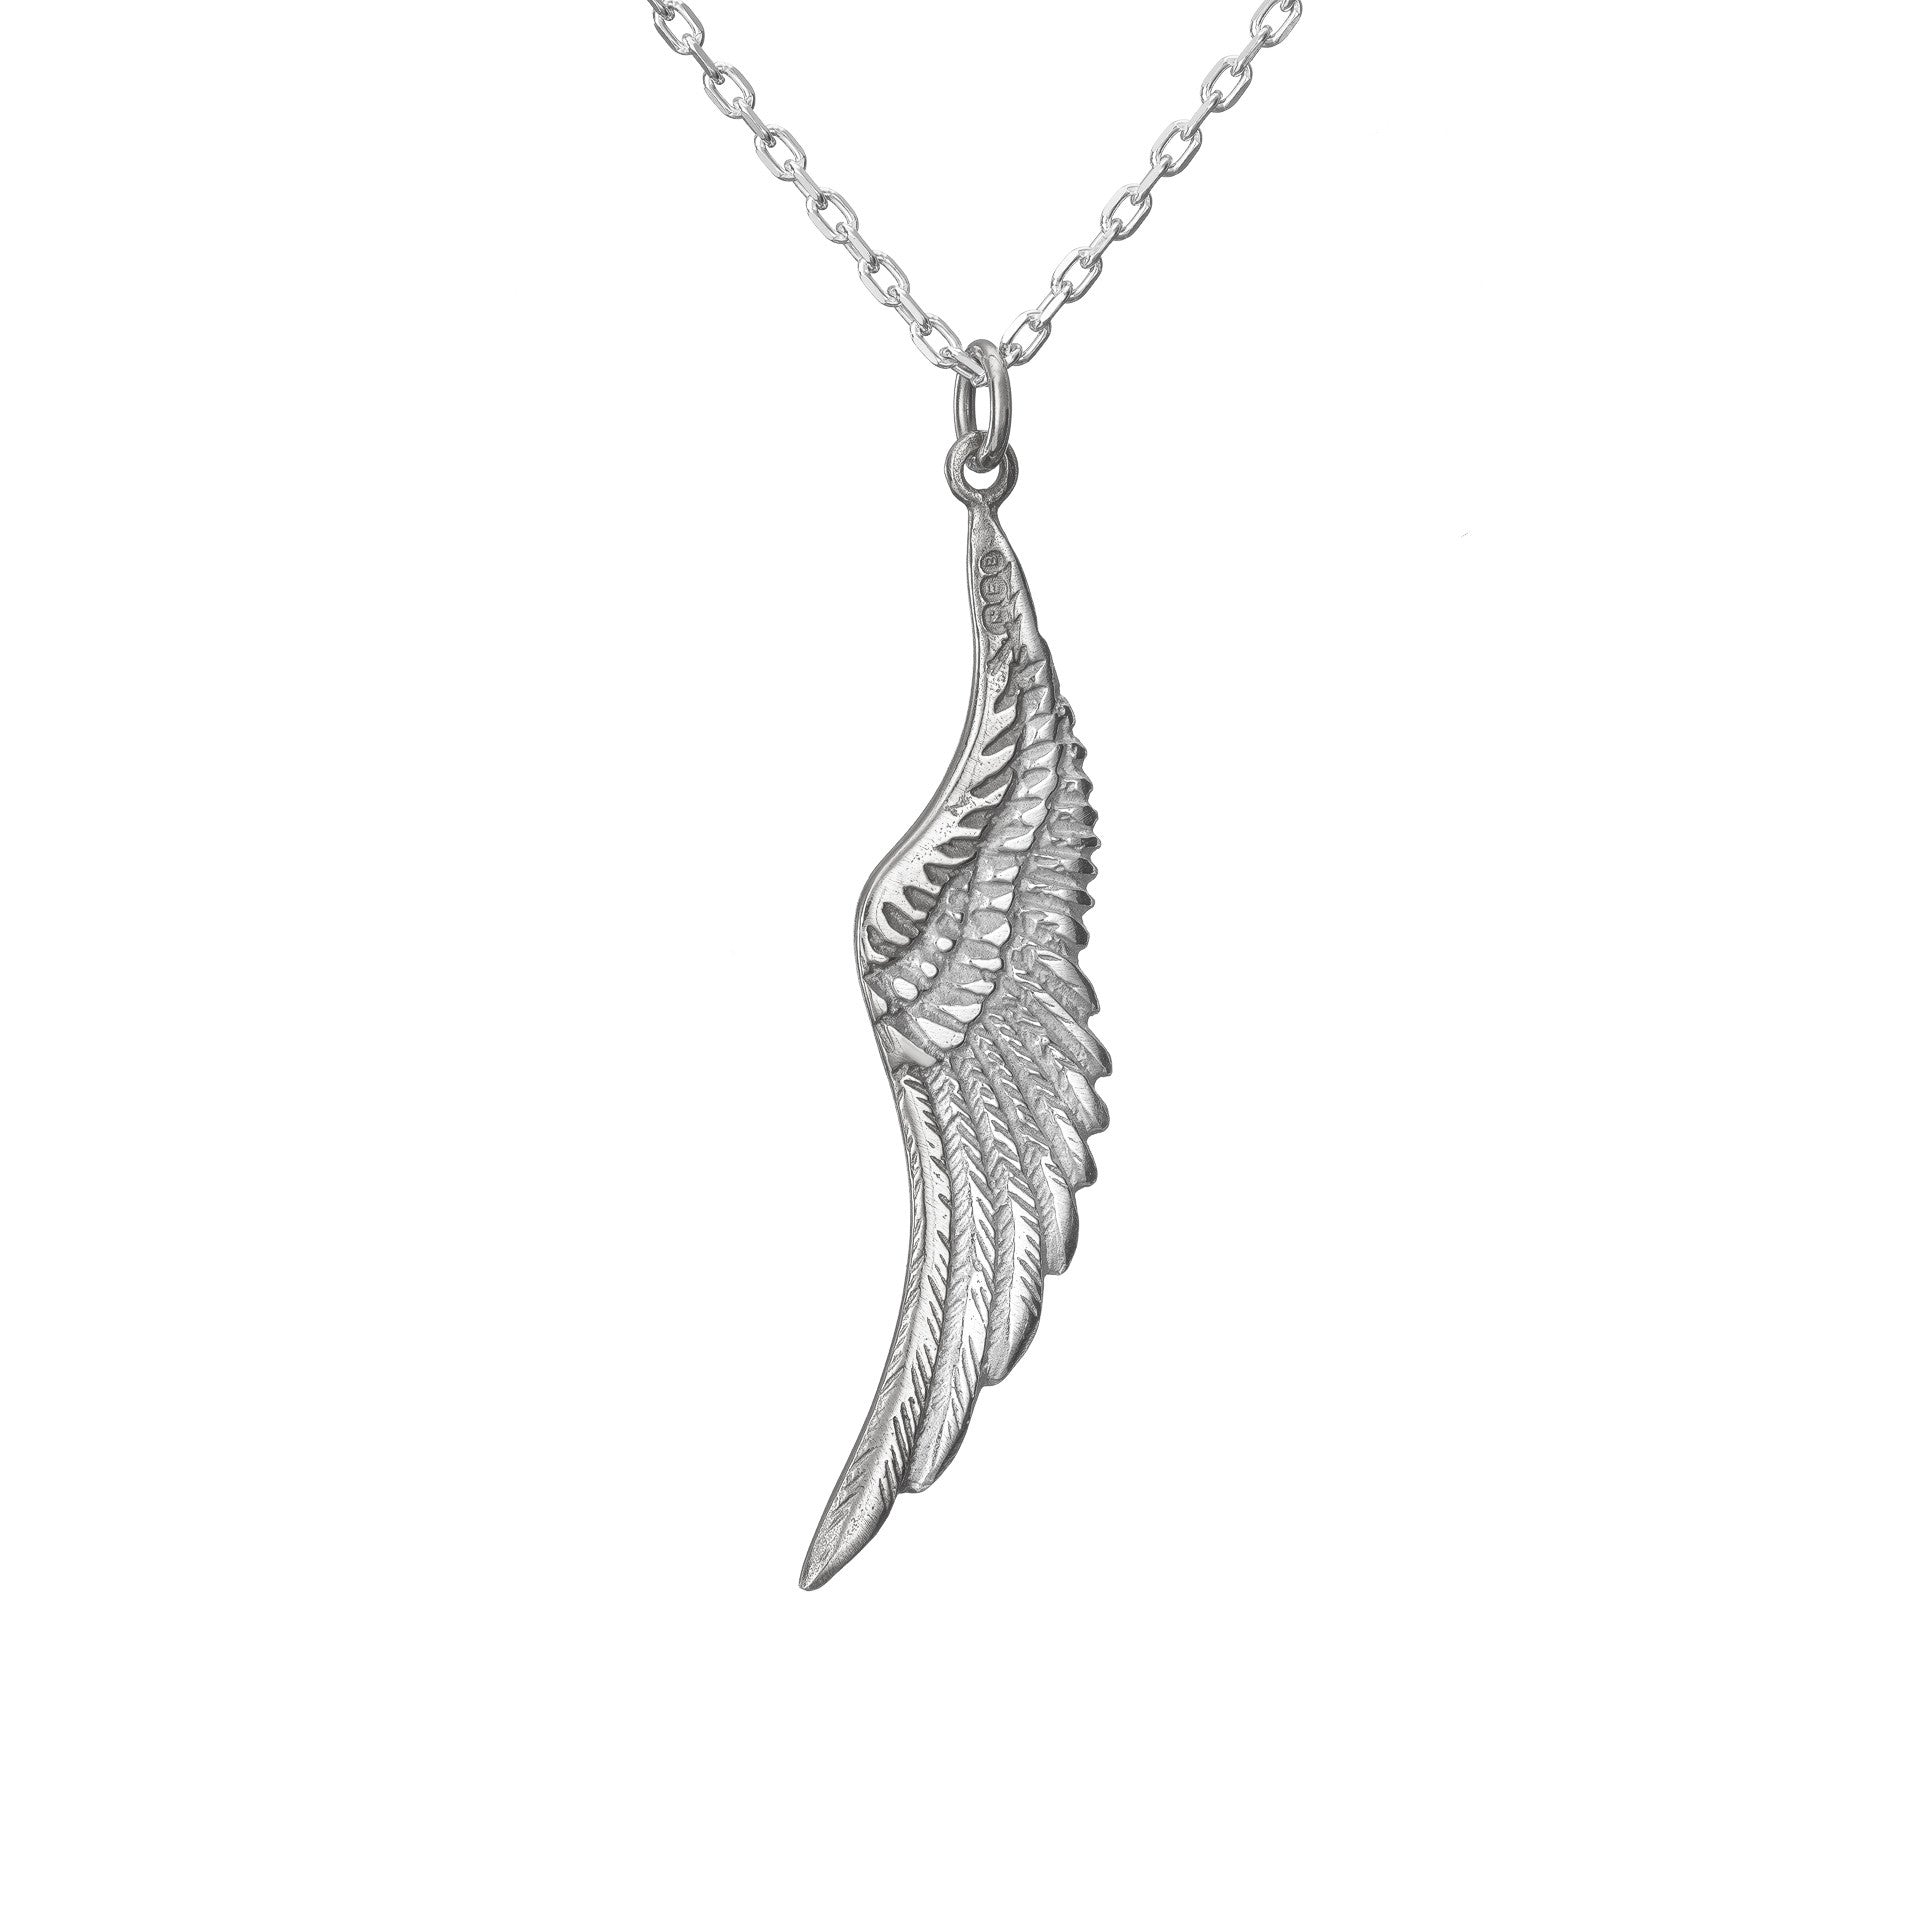 Angel Wings Pendant made from sterling silver, a special jewellery gift for a loved one!